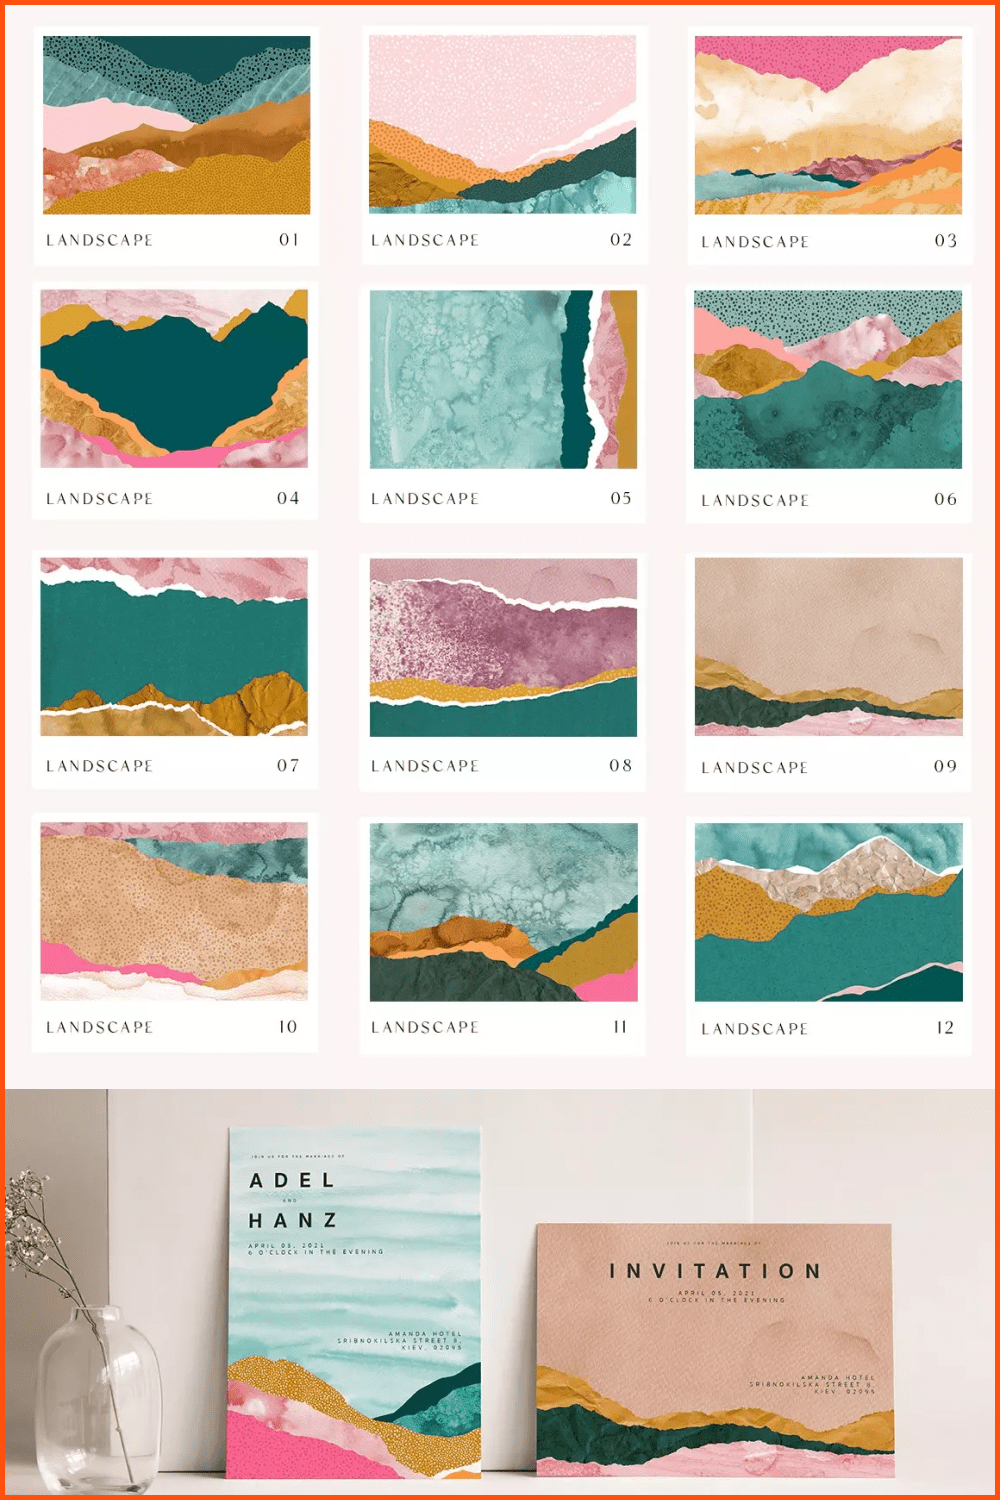 70 Abstract Landscape Collage Shapes.